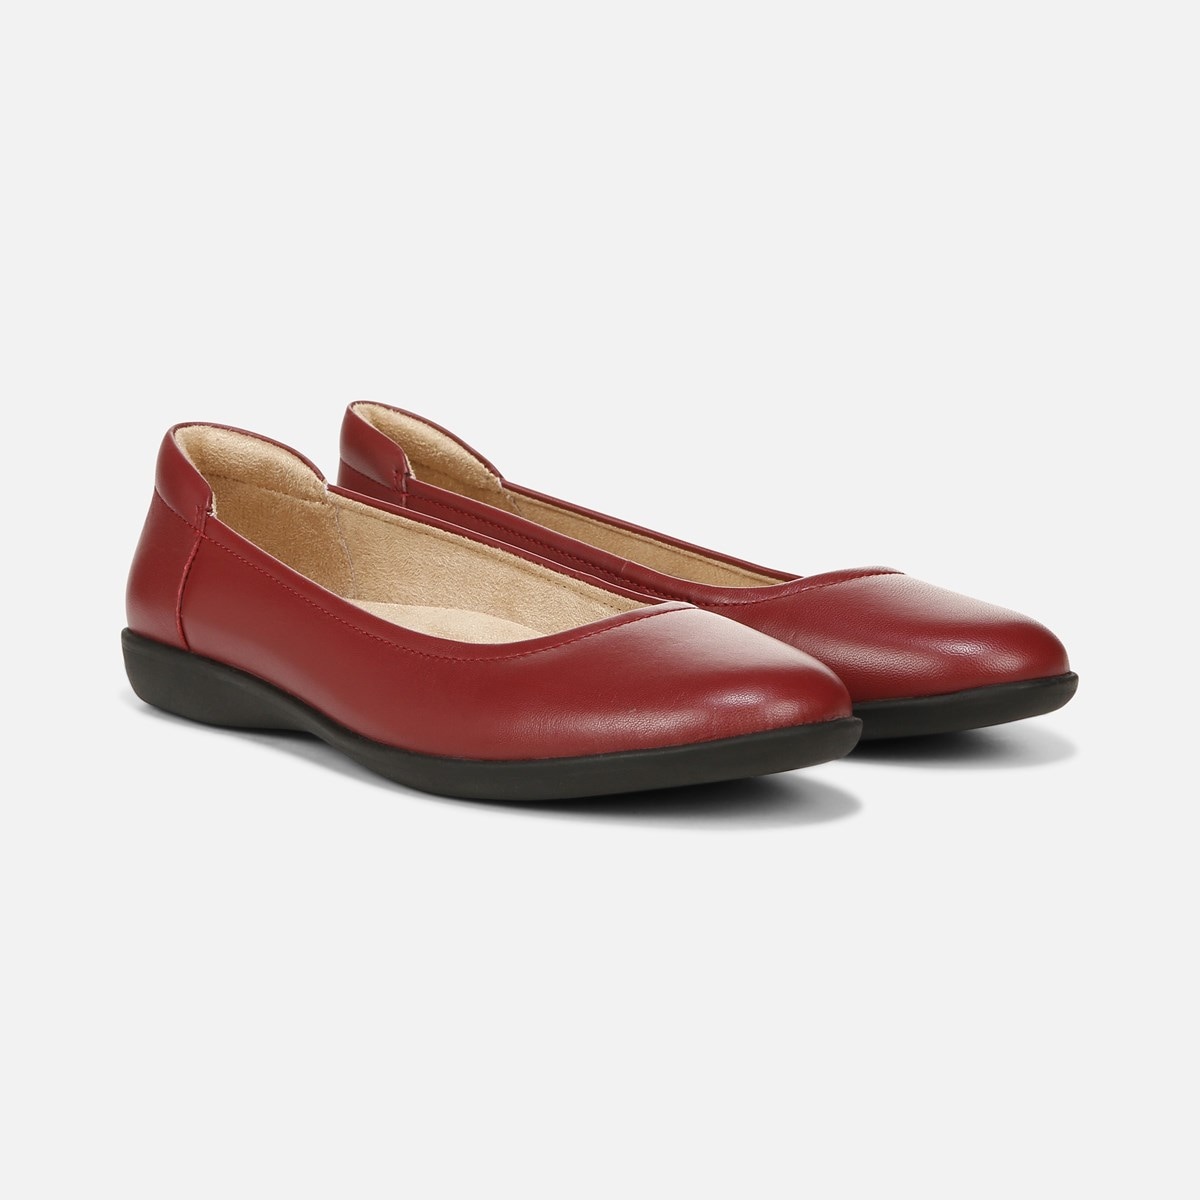 Naturalizer Flexy in Red Leather Flats 